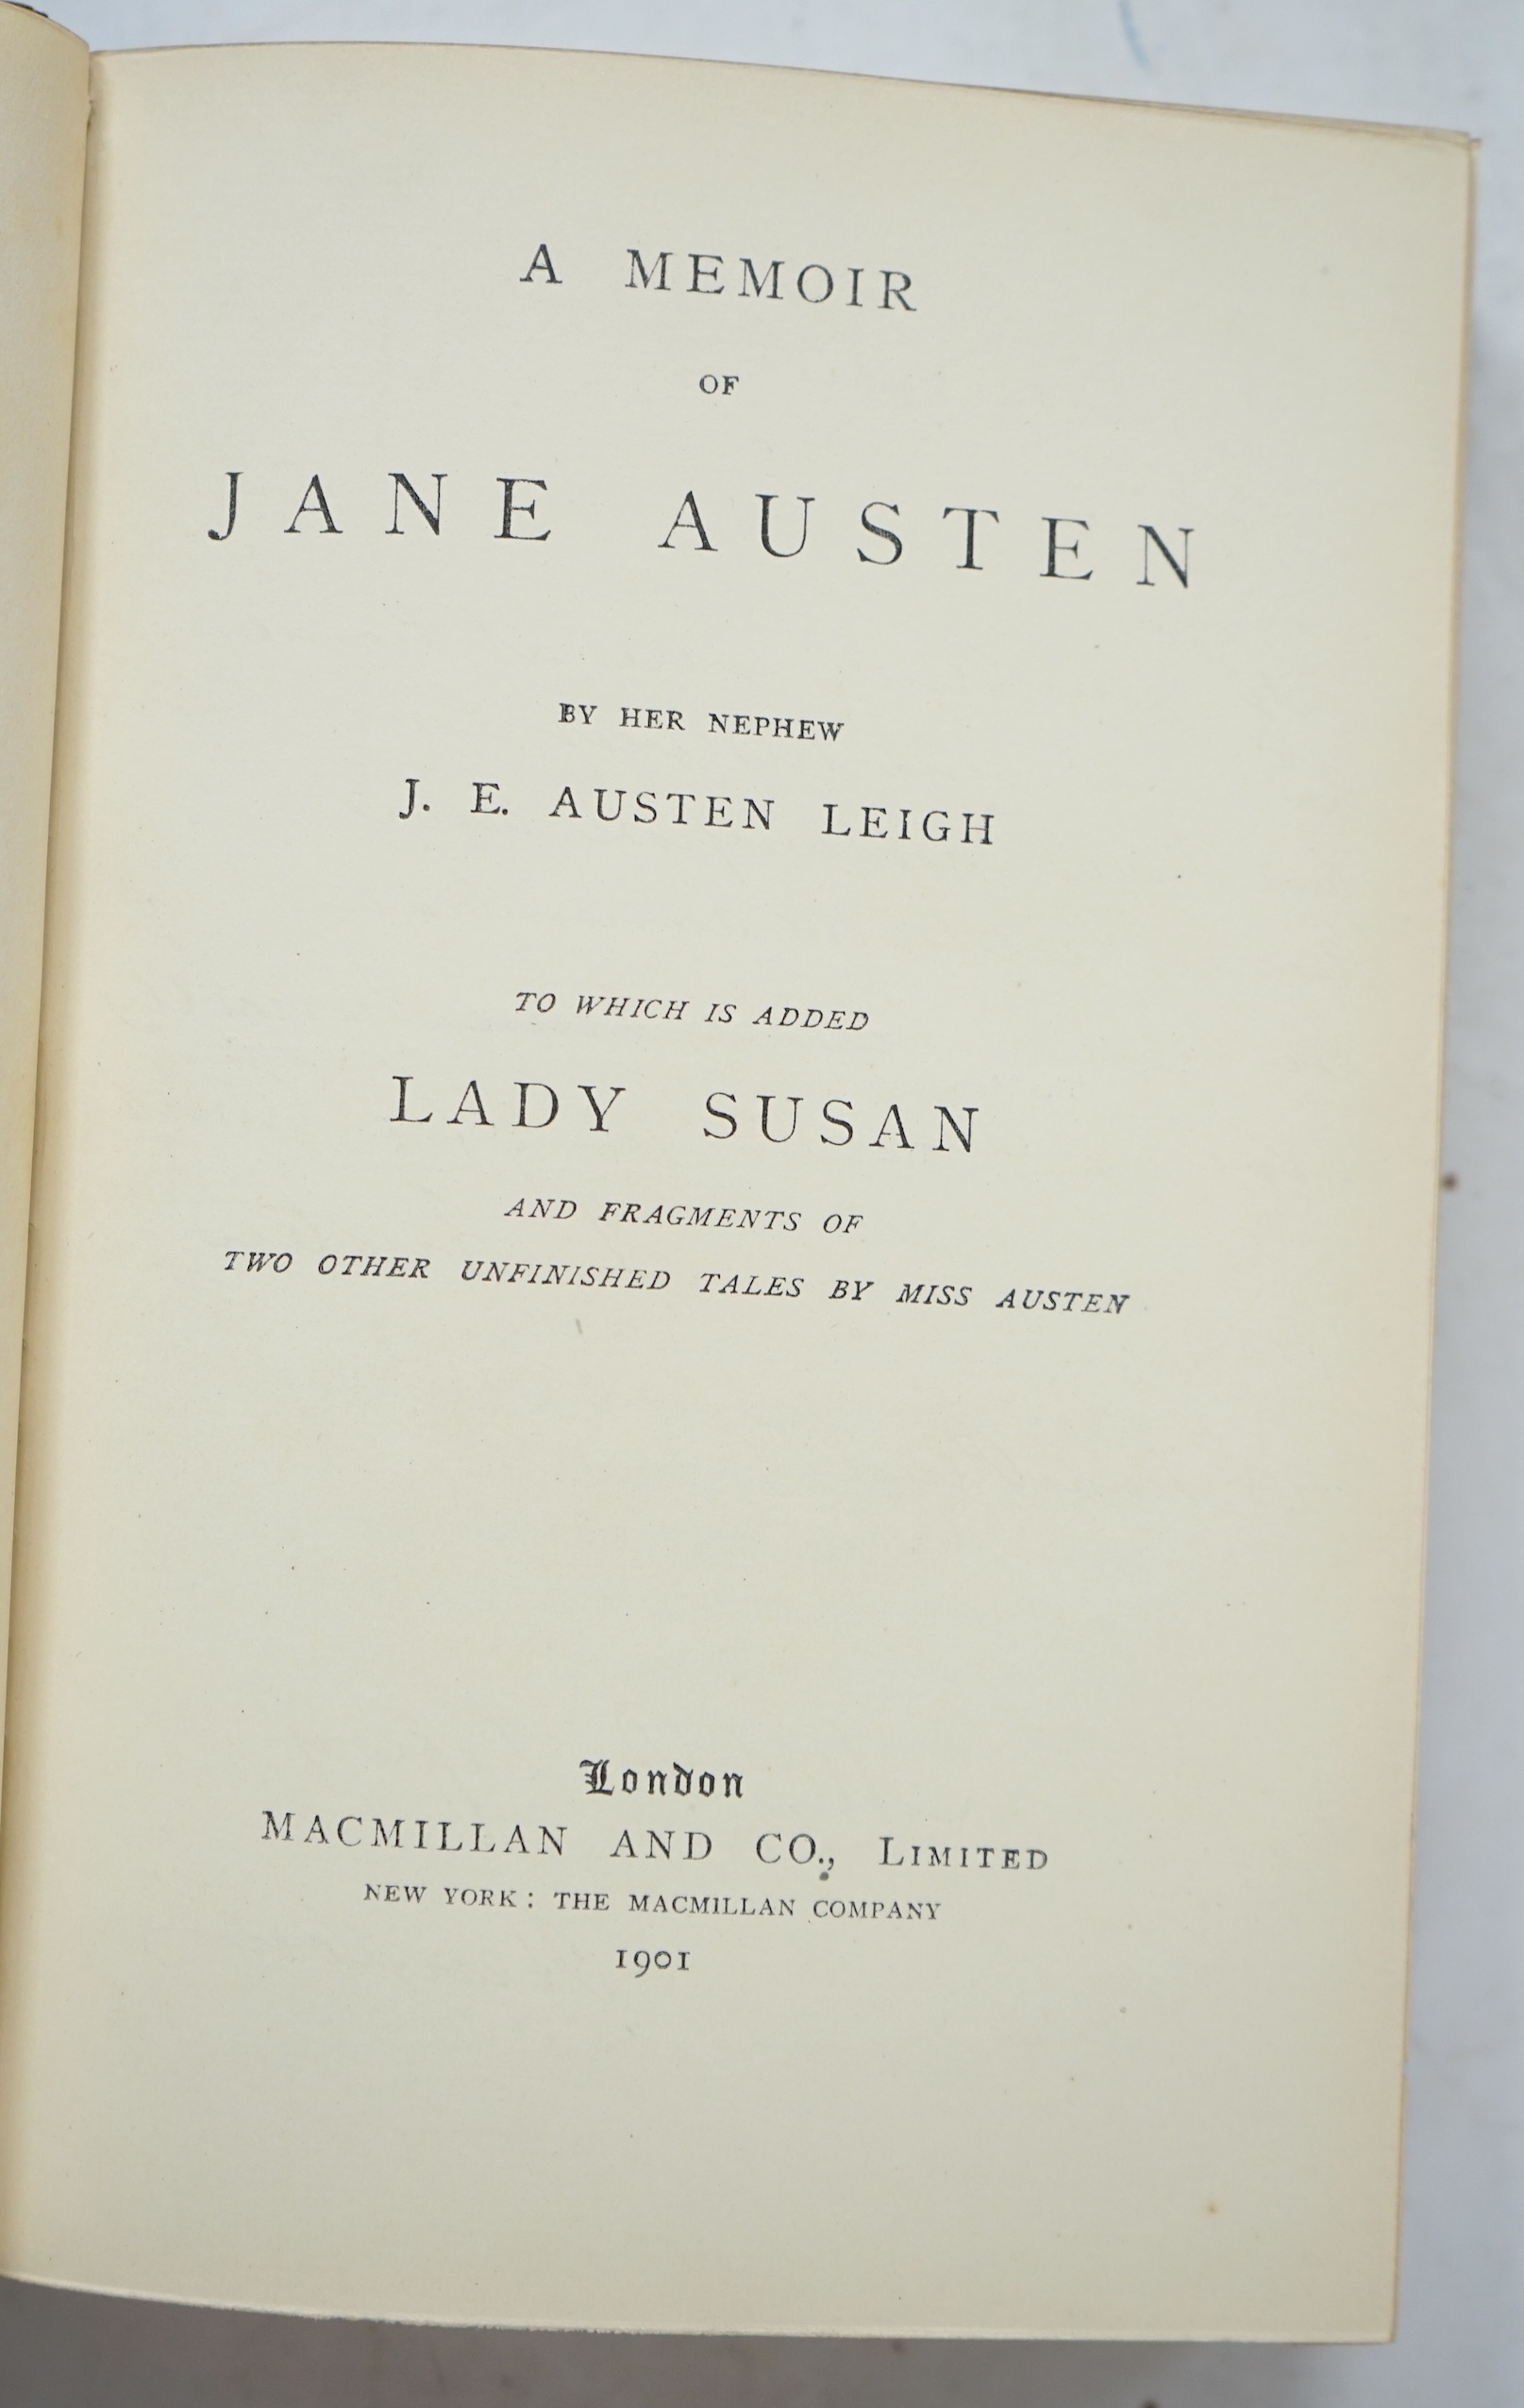 Austen, Jane - (Collected Novels). new editions, 5 vols. frontispieces; earlier 20th century green half calf and cloth, gilt decorated panelled spines, gilt tops, marbled e/ps. (by Spottiswoode & Co). Richard Bentley, 18